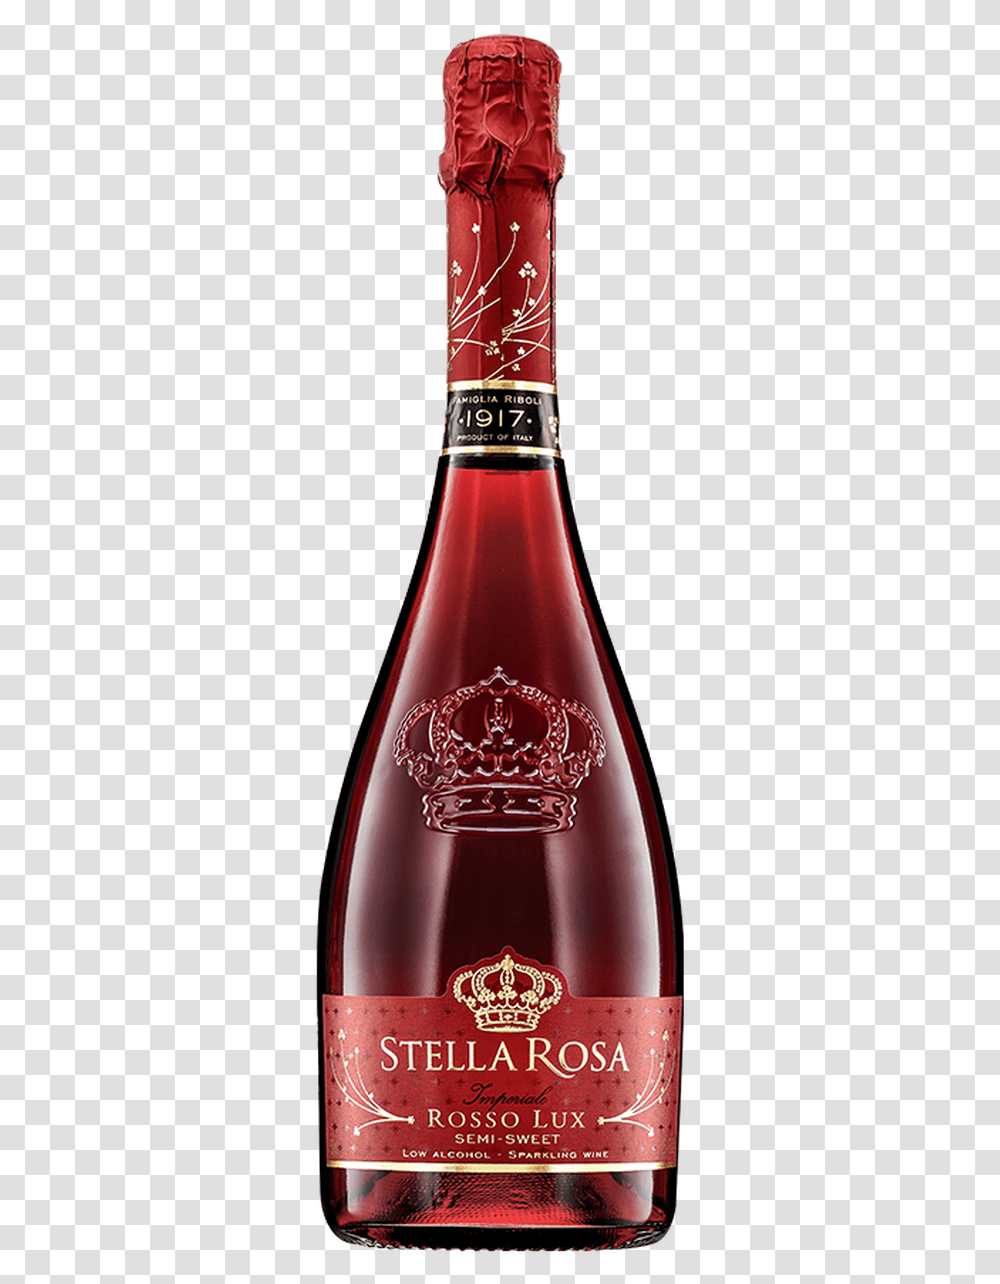 Stella Rosa Imperial Rosso Lux Stella Rosa Rosso Lux, Beverage, Drink, Alcohol, Bottle Transparent Png